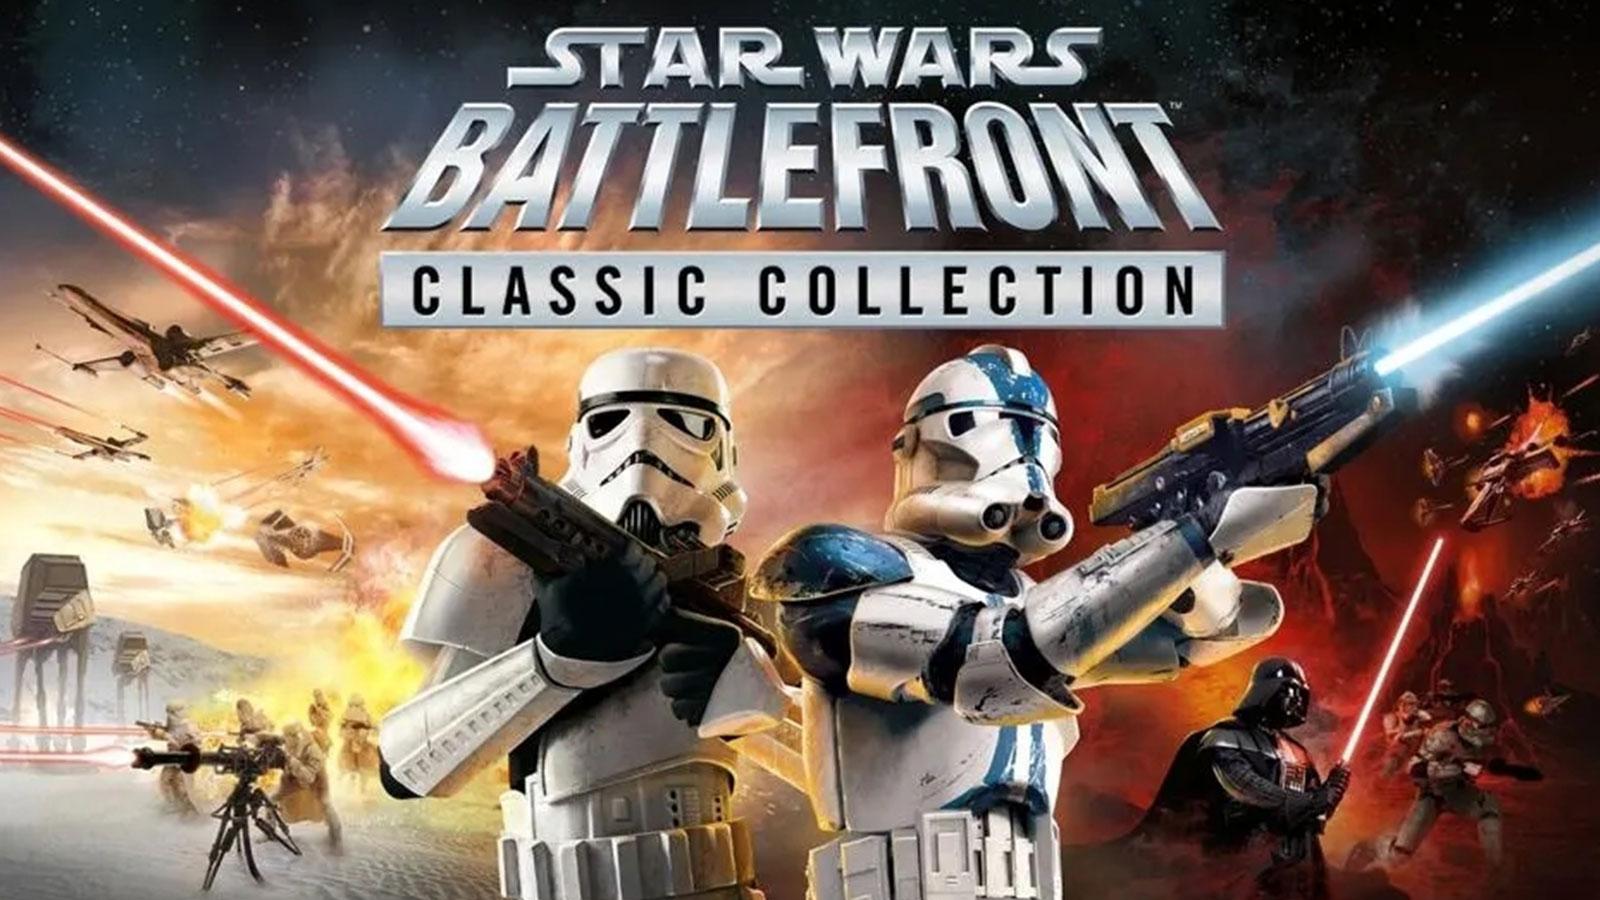 Star Wars Battlefront Classic Collection poster